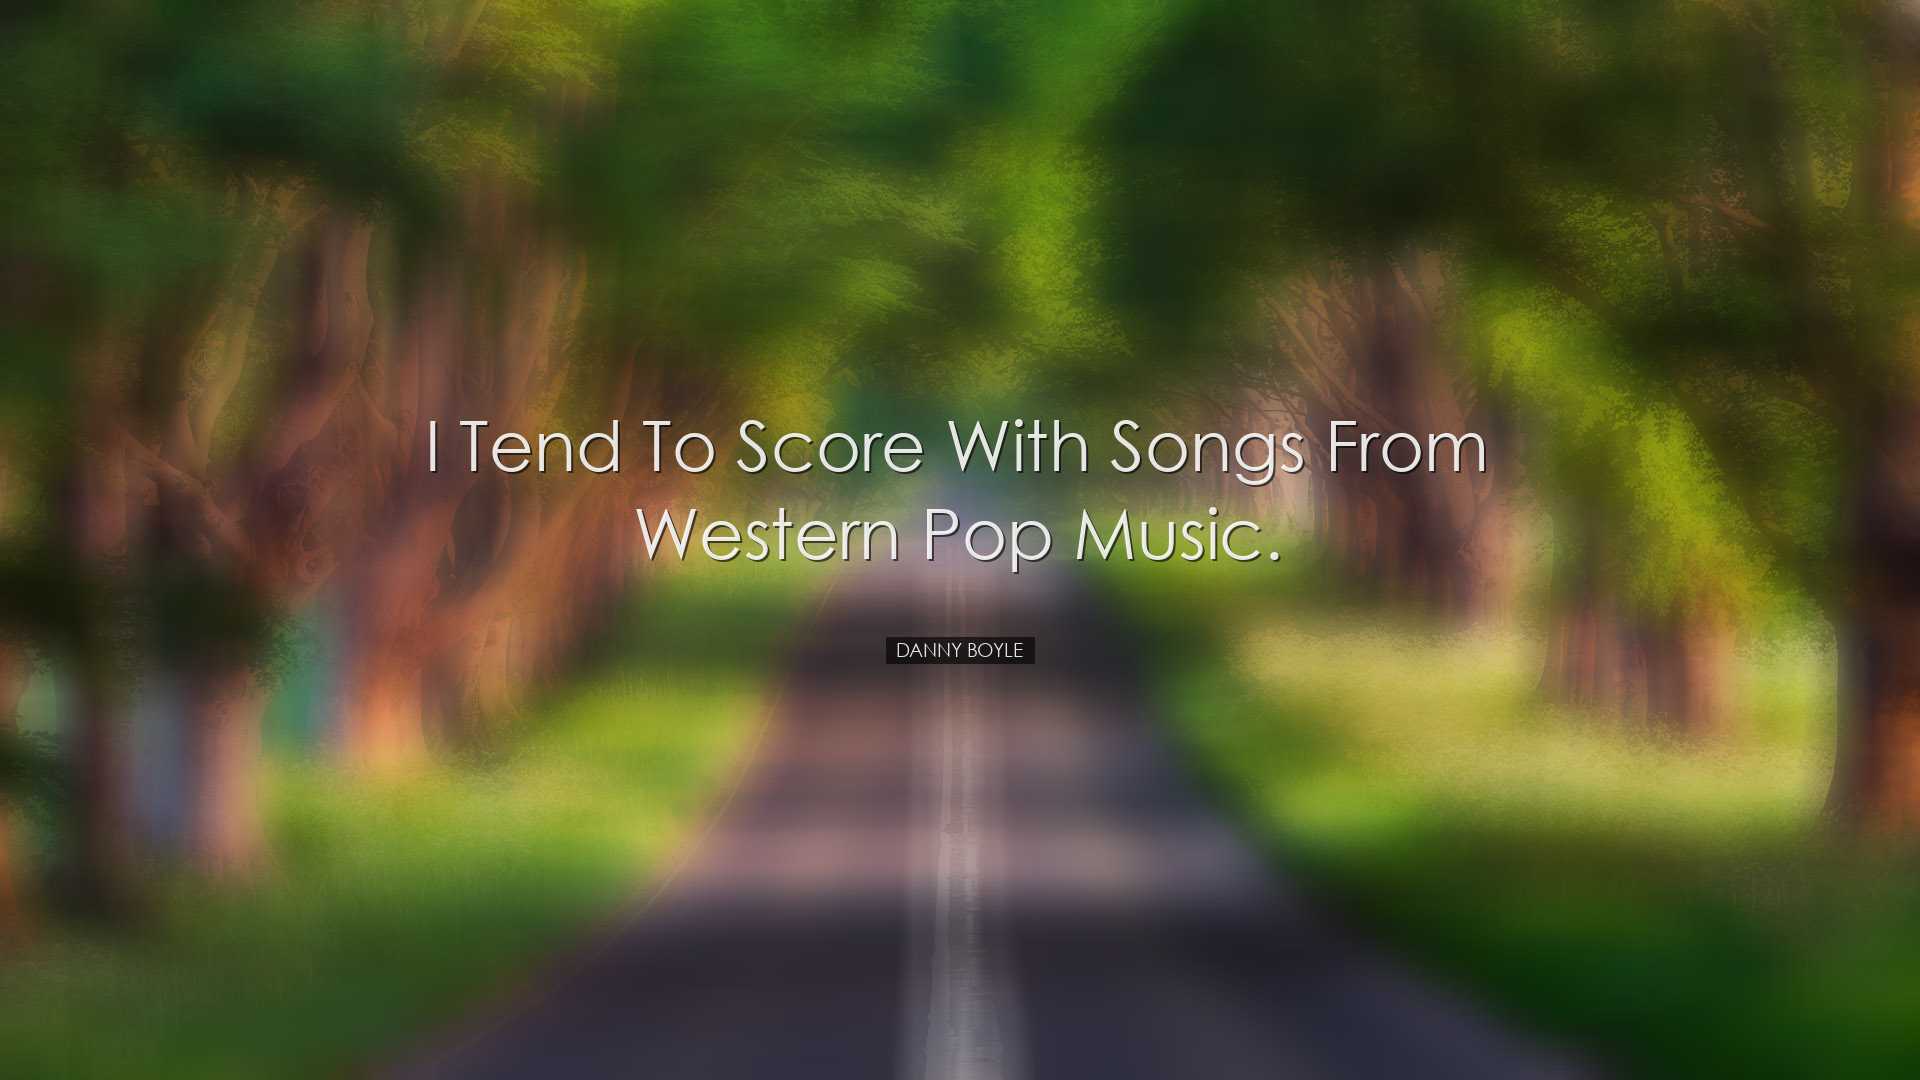 I tend to score with songs from Western pop music. - Danny Boyle